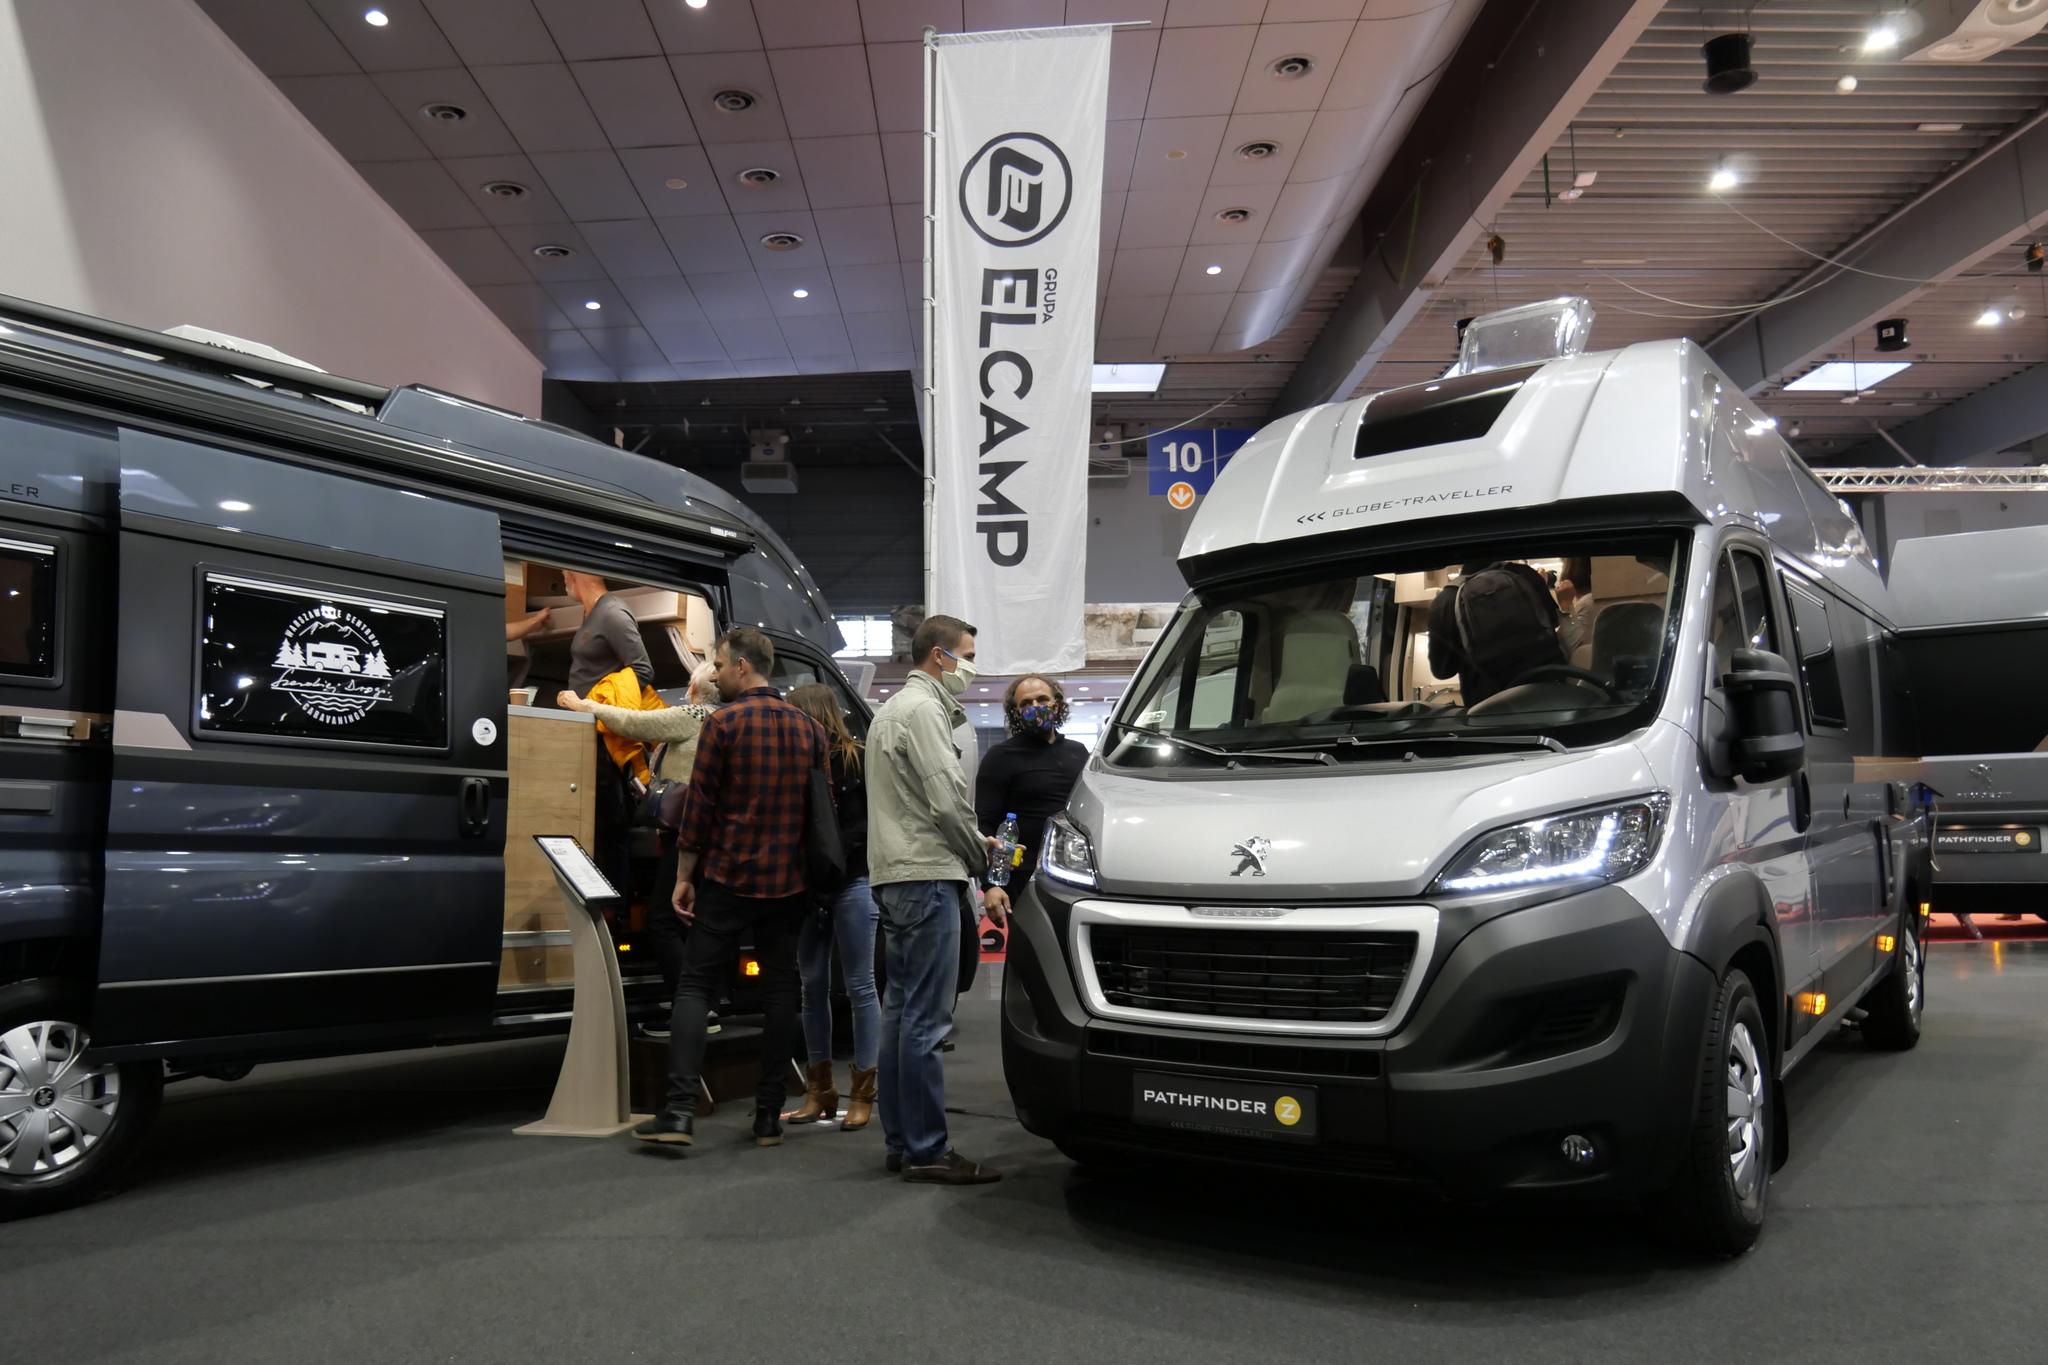 A weekend with motorhomes and more. The 4th edition of Caravans Salon Poland in Poznań will take place on September 24-26 – image 3